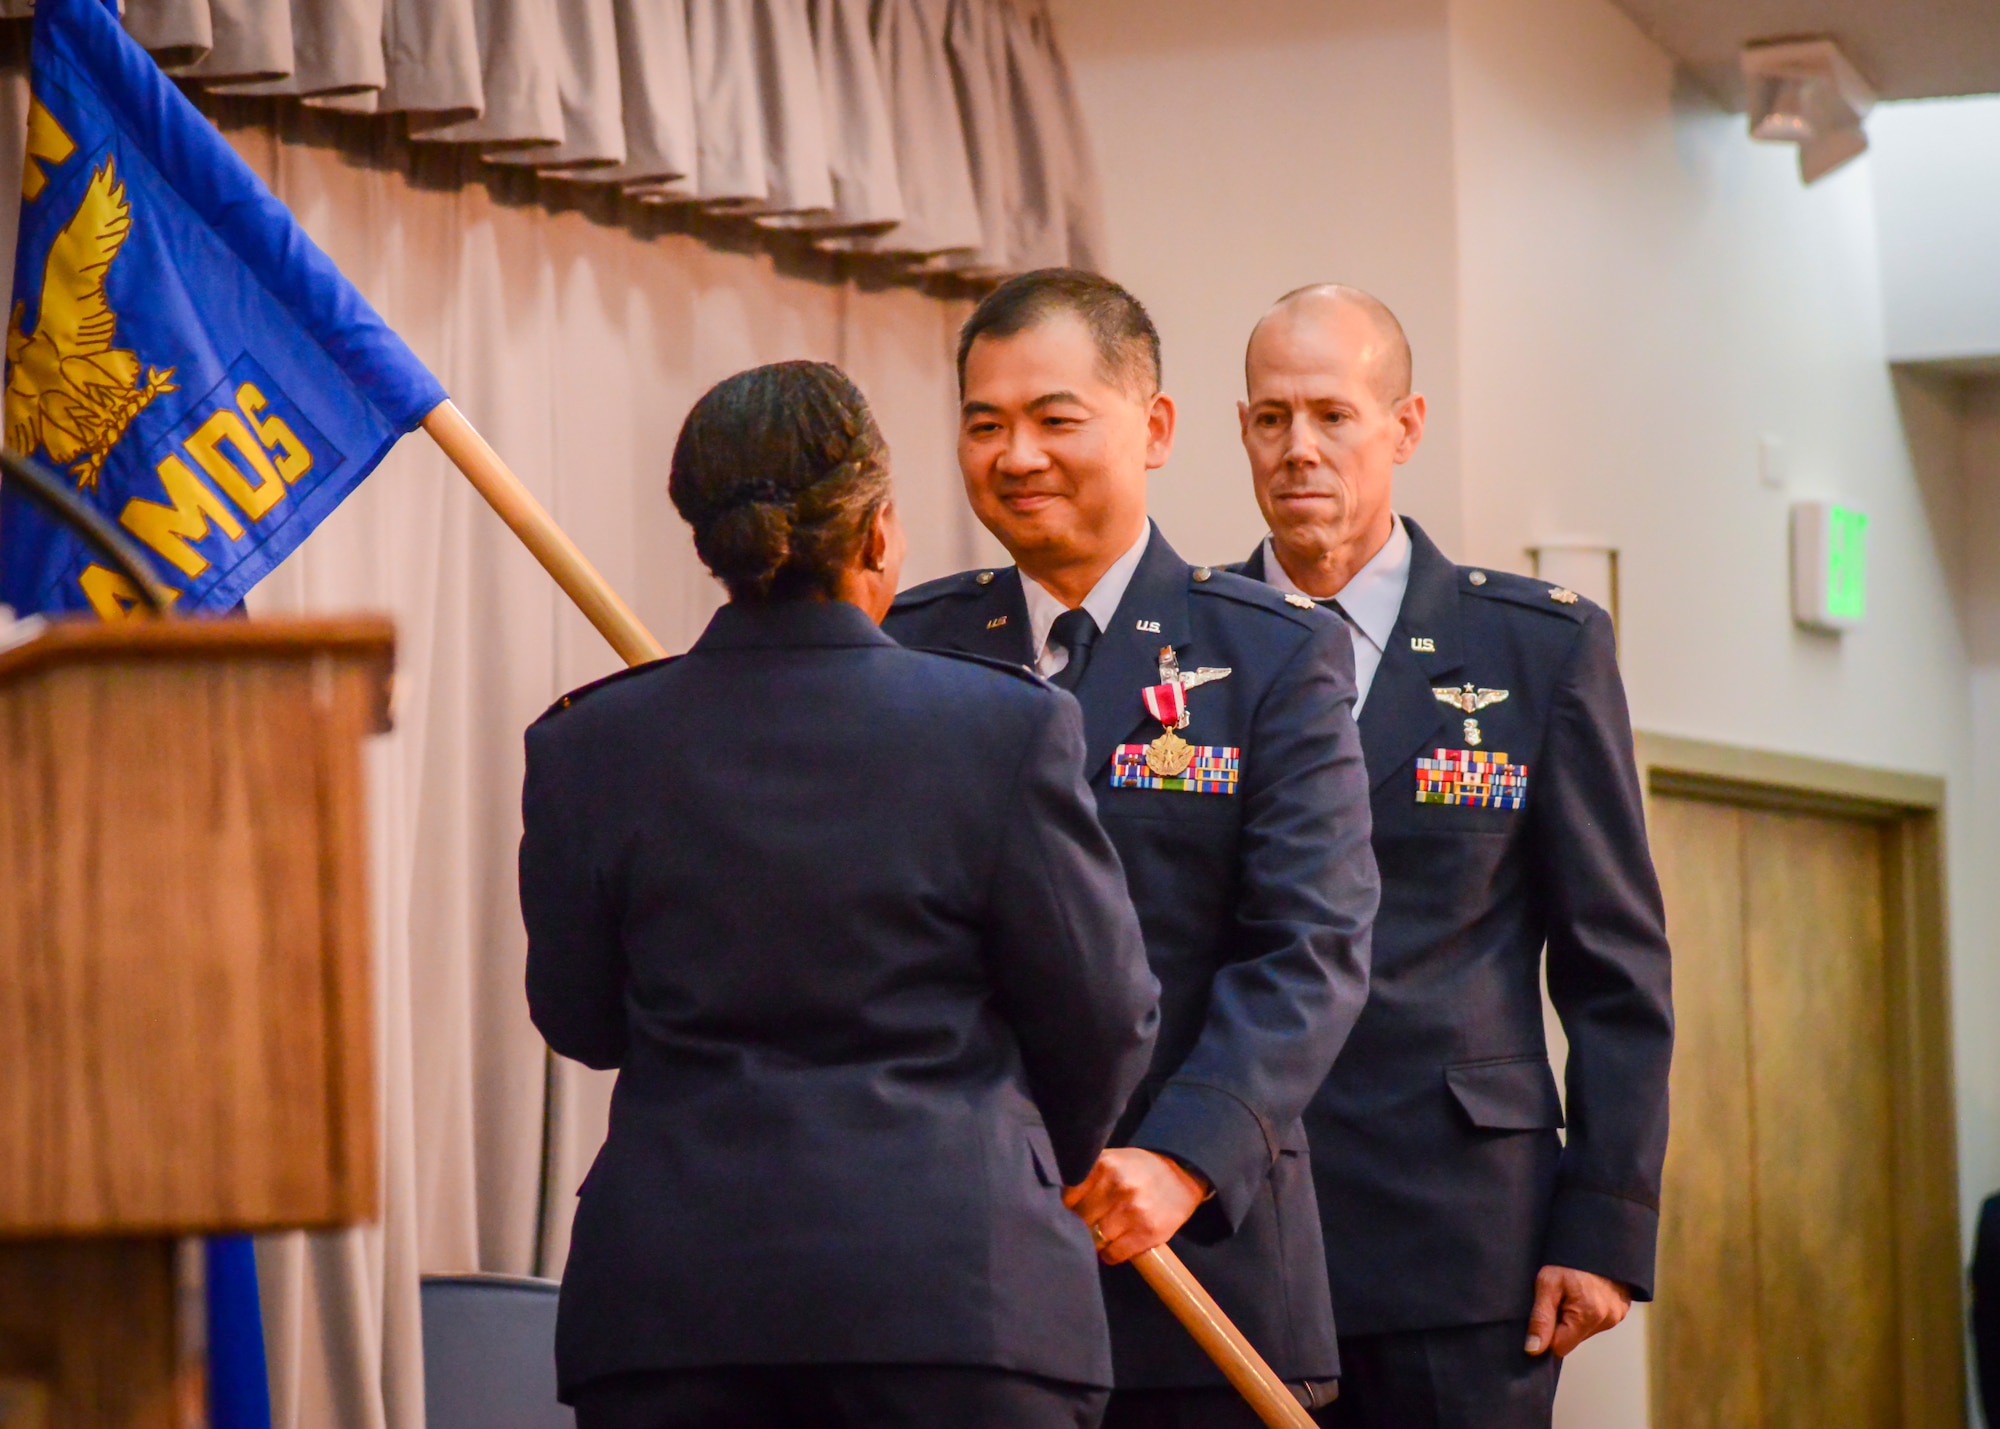 Lt. Col. Vinh Tran, the outgoing 412th Aerospace Medicine Squadron Commander, hands the unit guidon back to Col. Gwendolyn Foster, 412th Medical Group Commander, during an inactivation and redesignation ceremony at Edwards Air Force Base, July 12. Tran relinquished his command to Lt. Col. Arthur Lawrance, the 412th AMDS was then redesignated into the 412th Operational Medical Readiness Squadron.